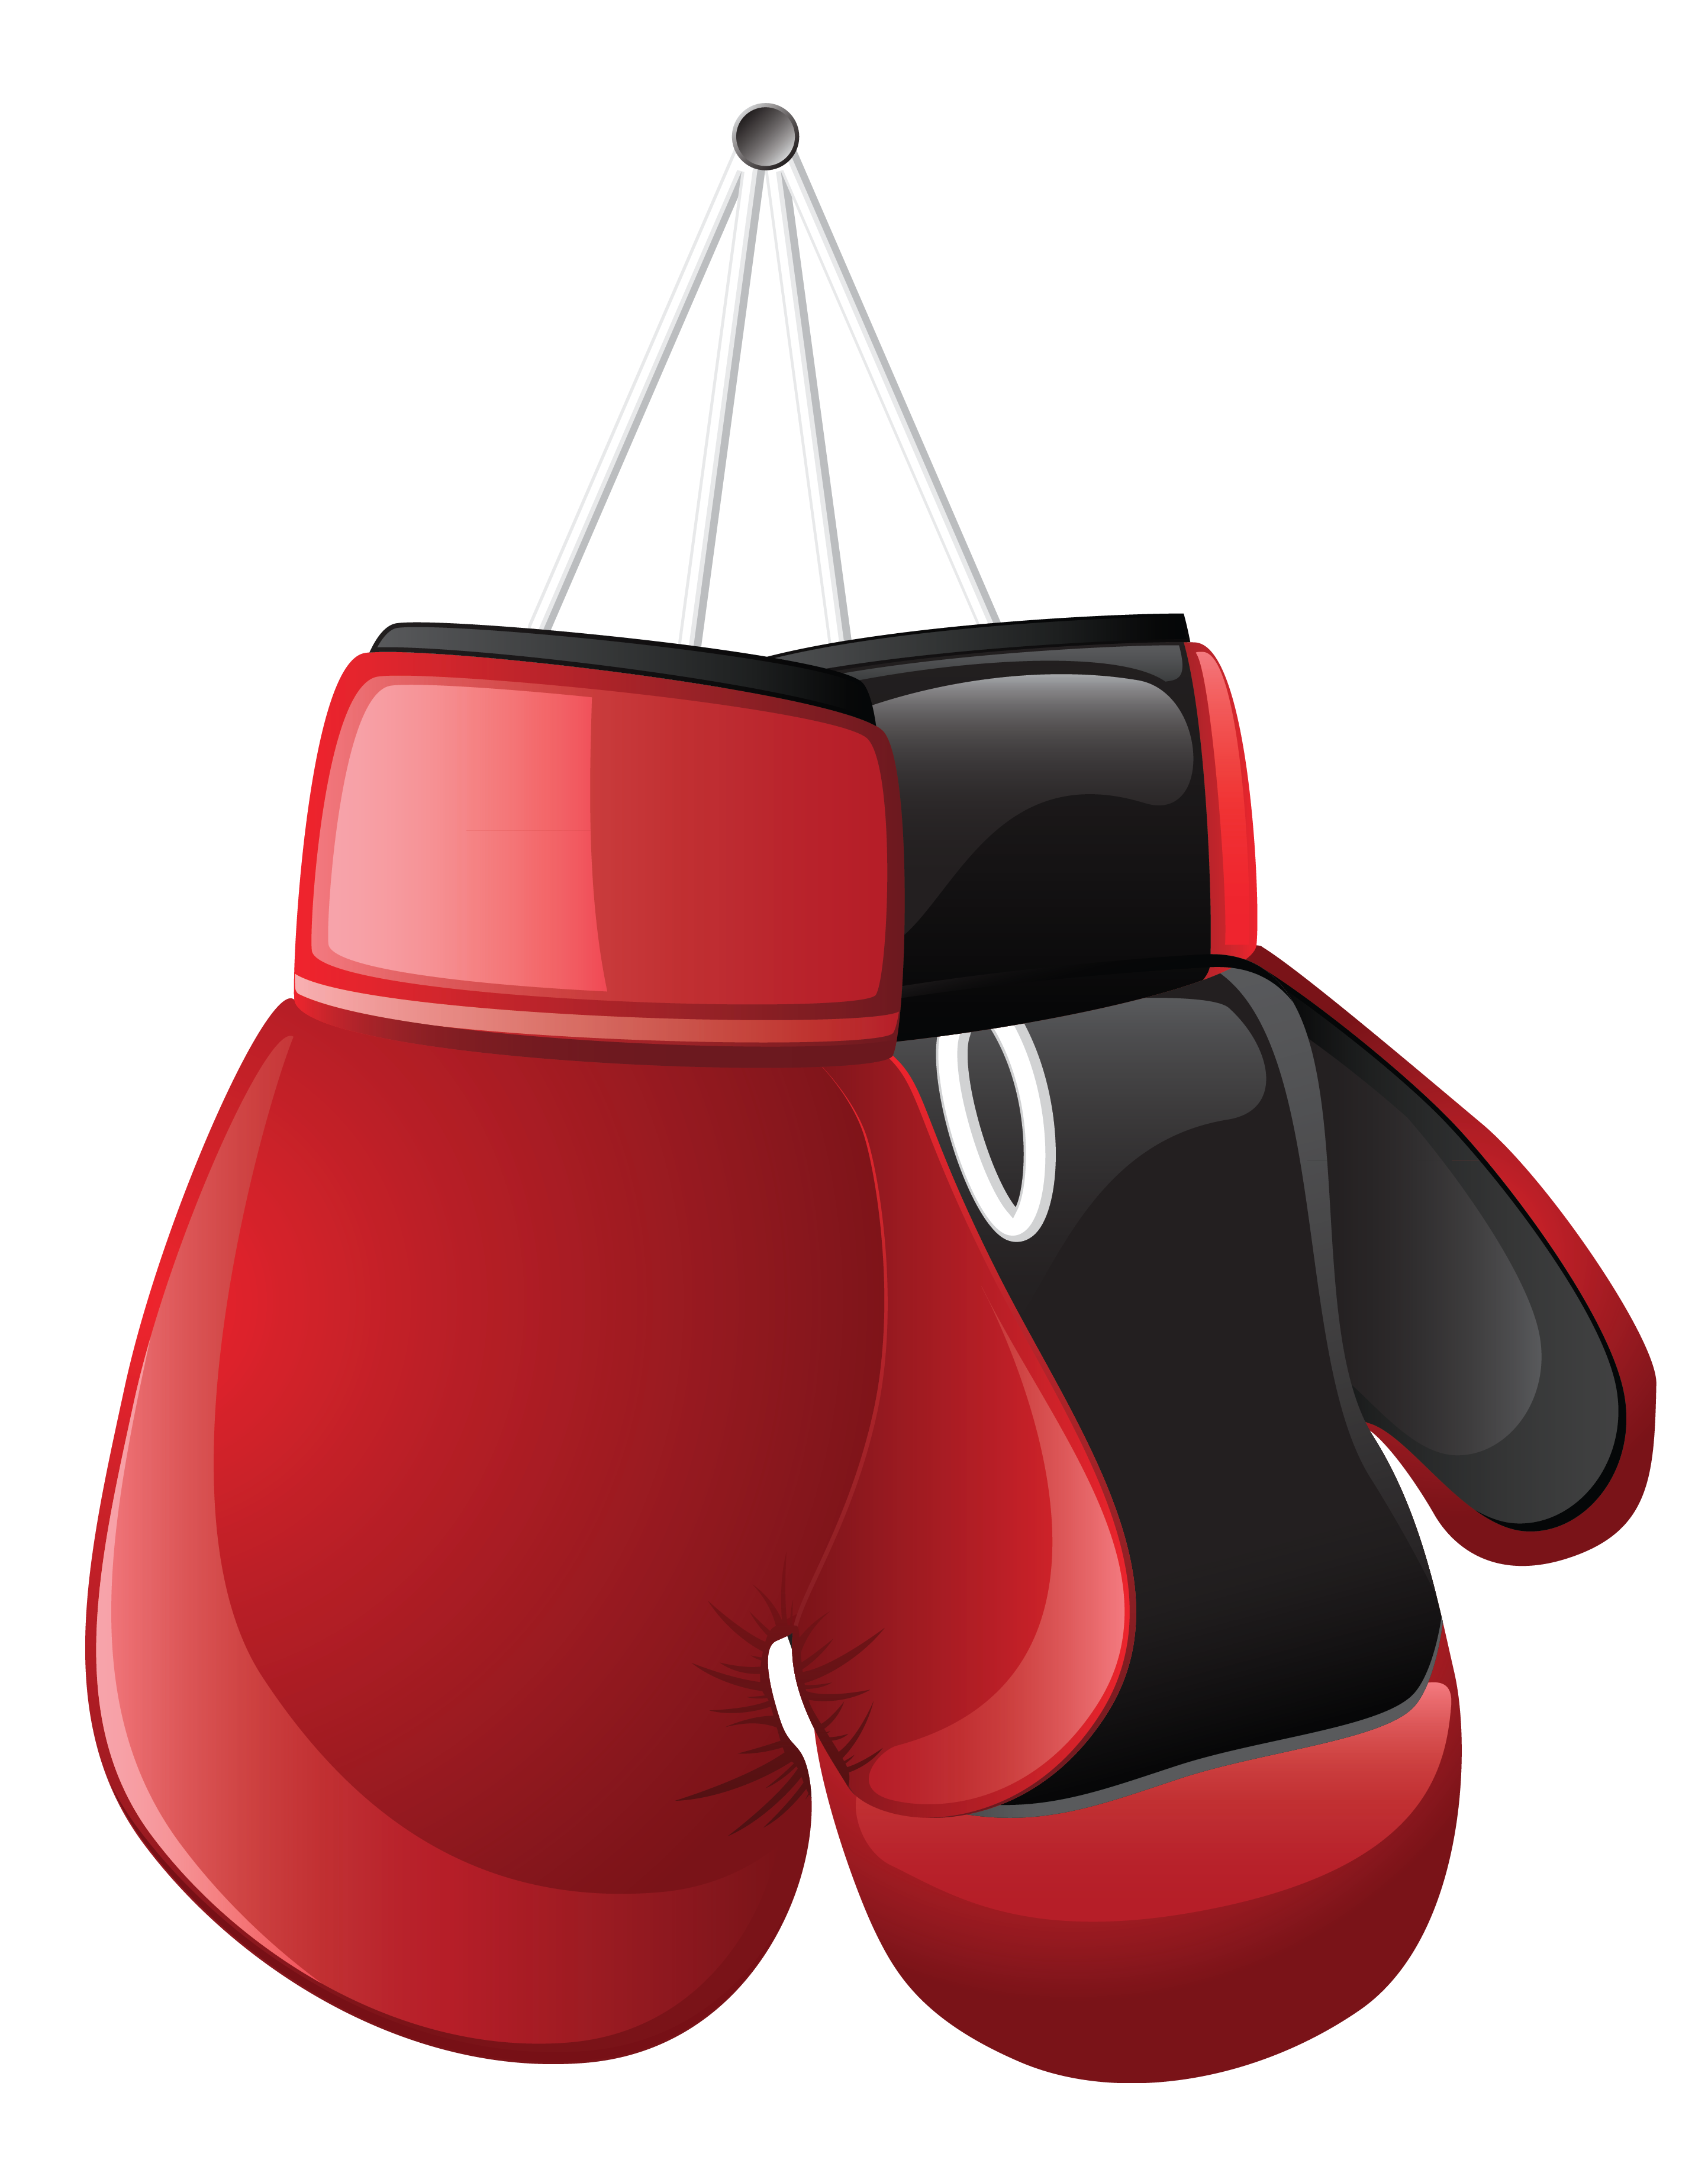 boxing-glove-pattern-use-the-printable-outline-for-crafts-creating